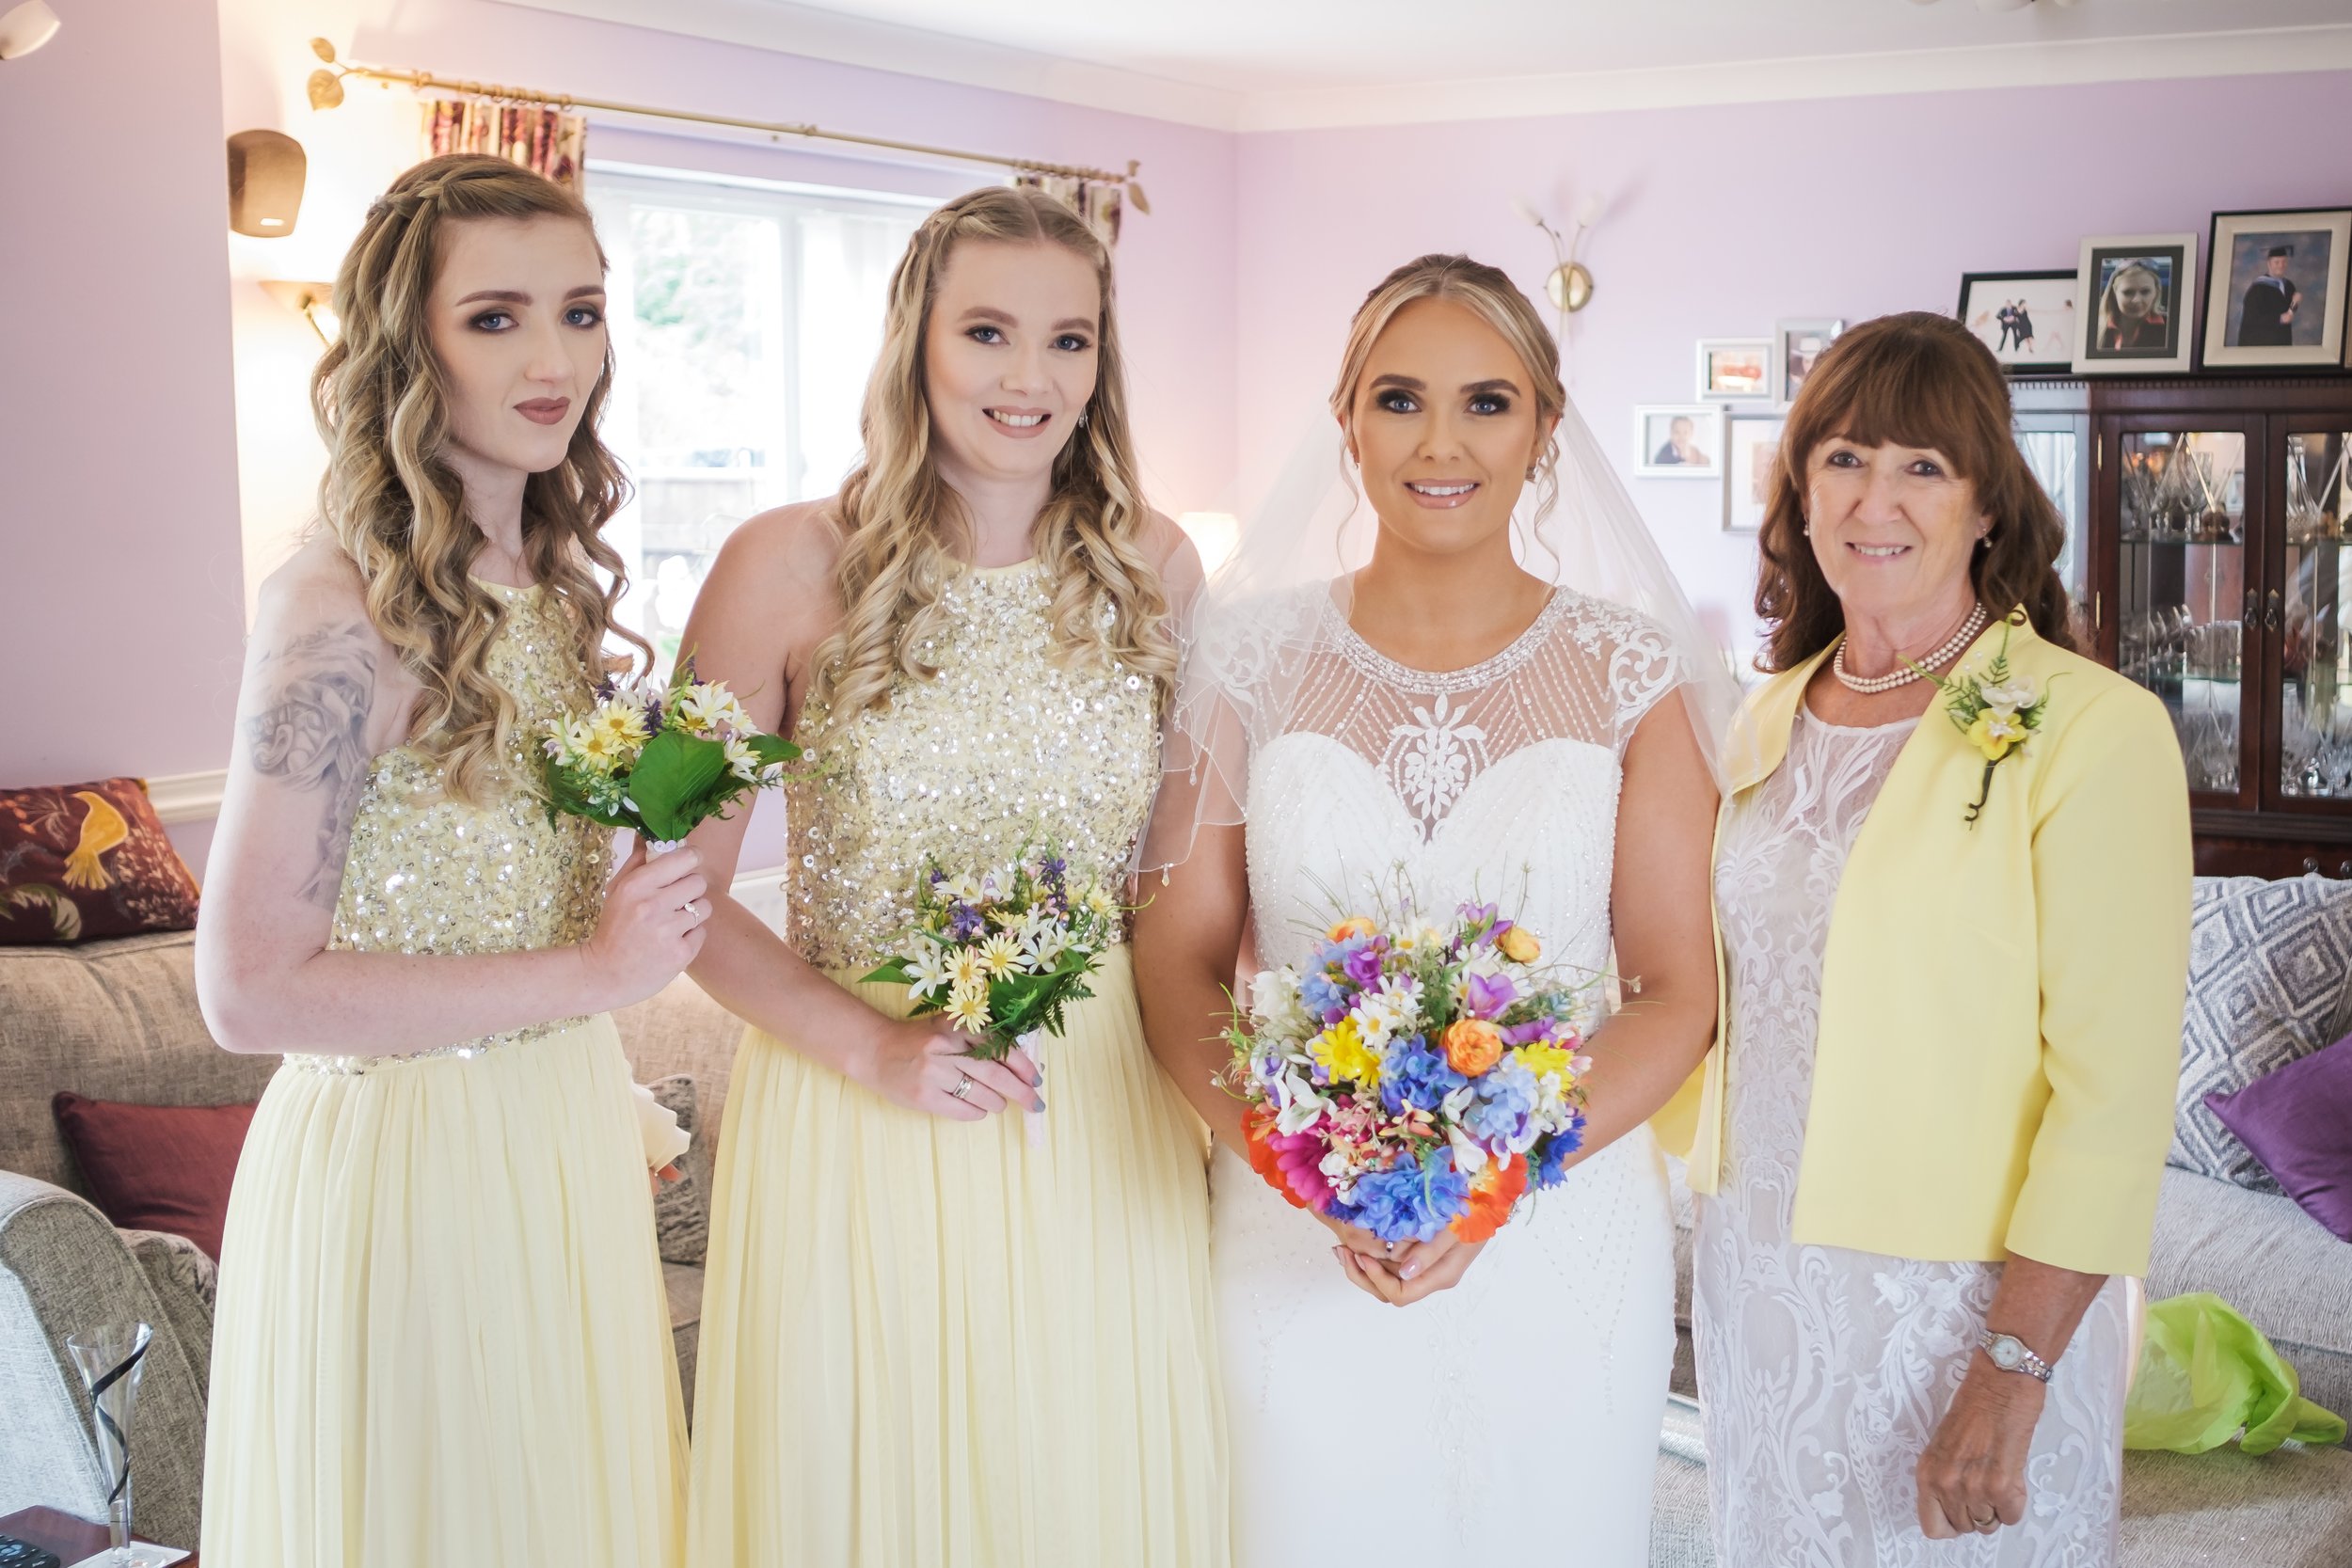 Sarah with her bridesmaids and her mother